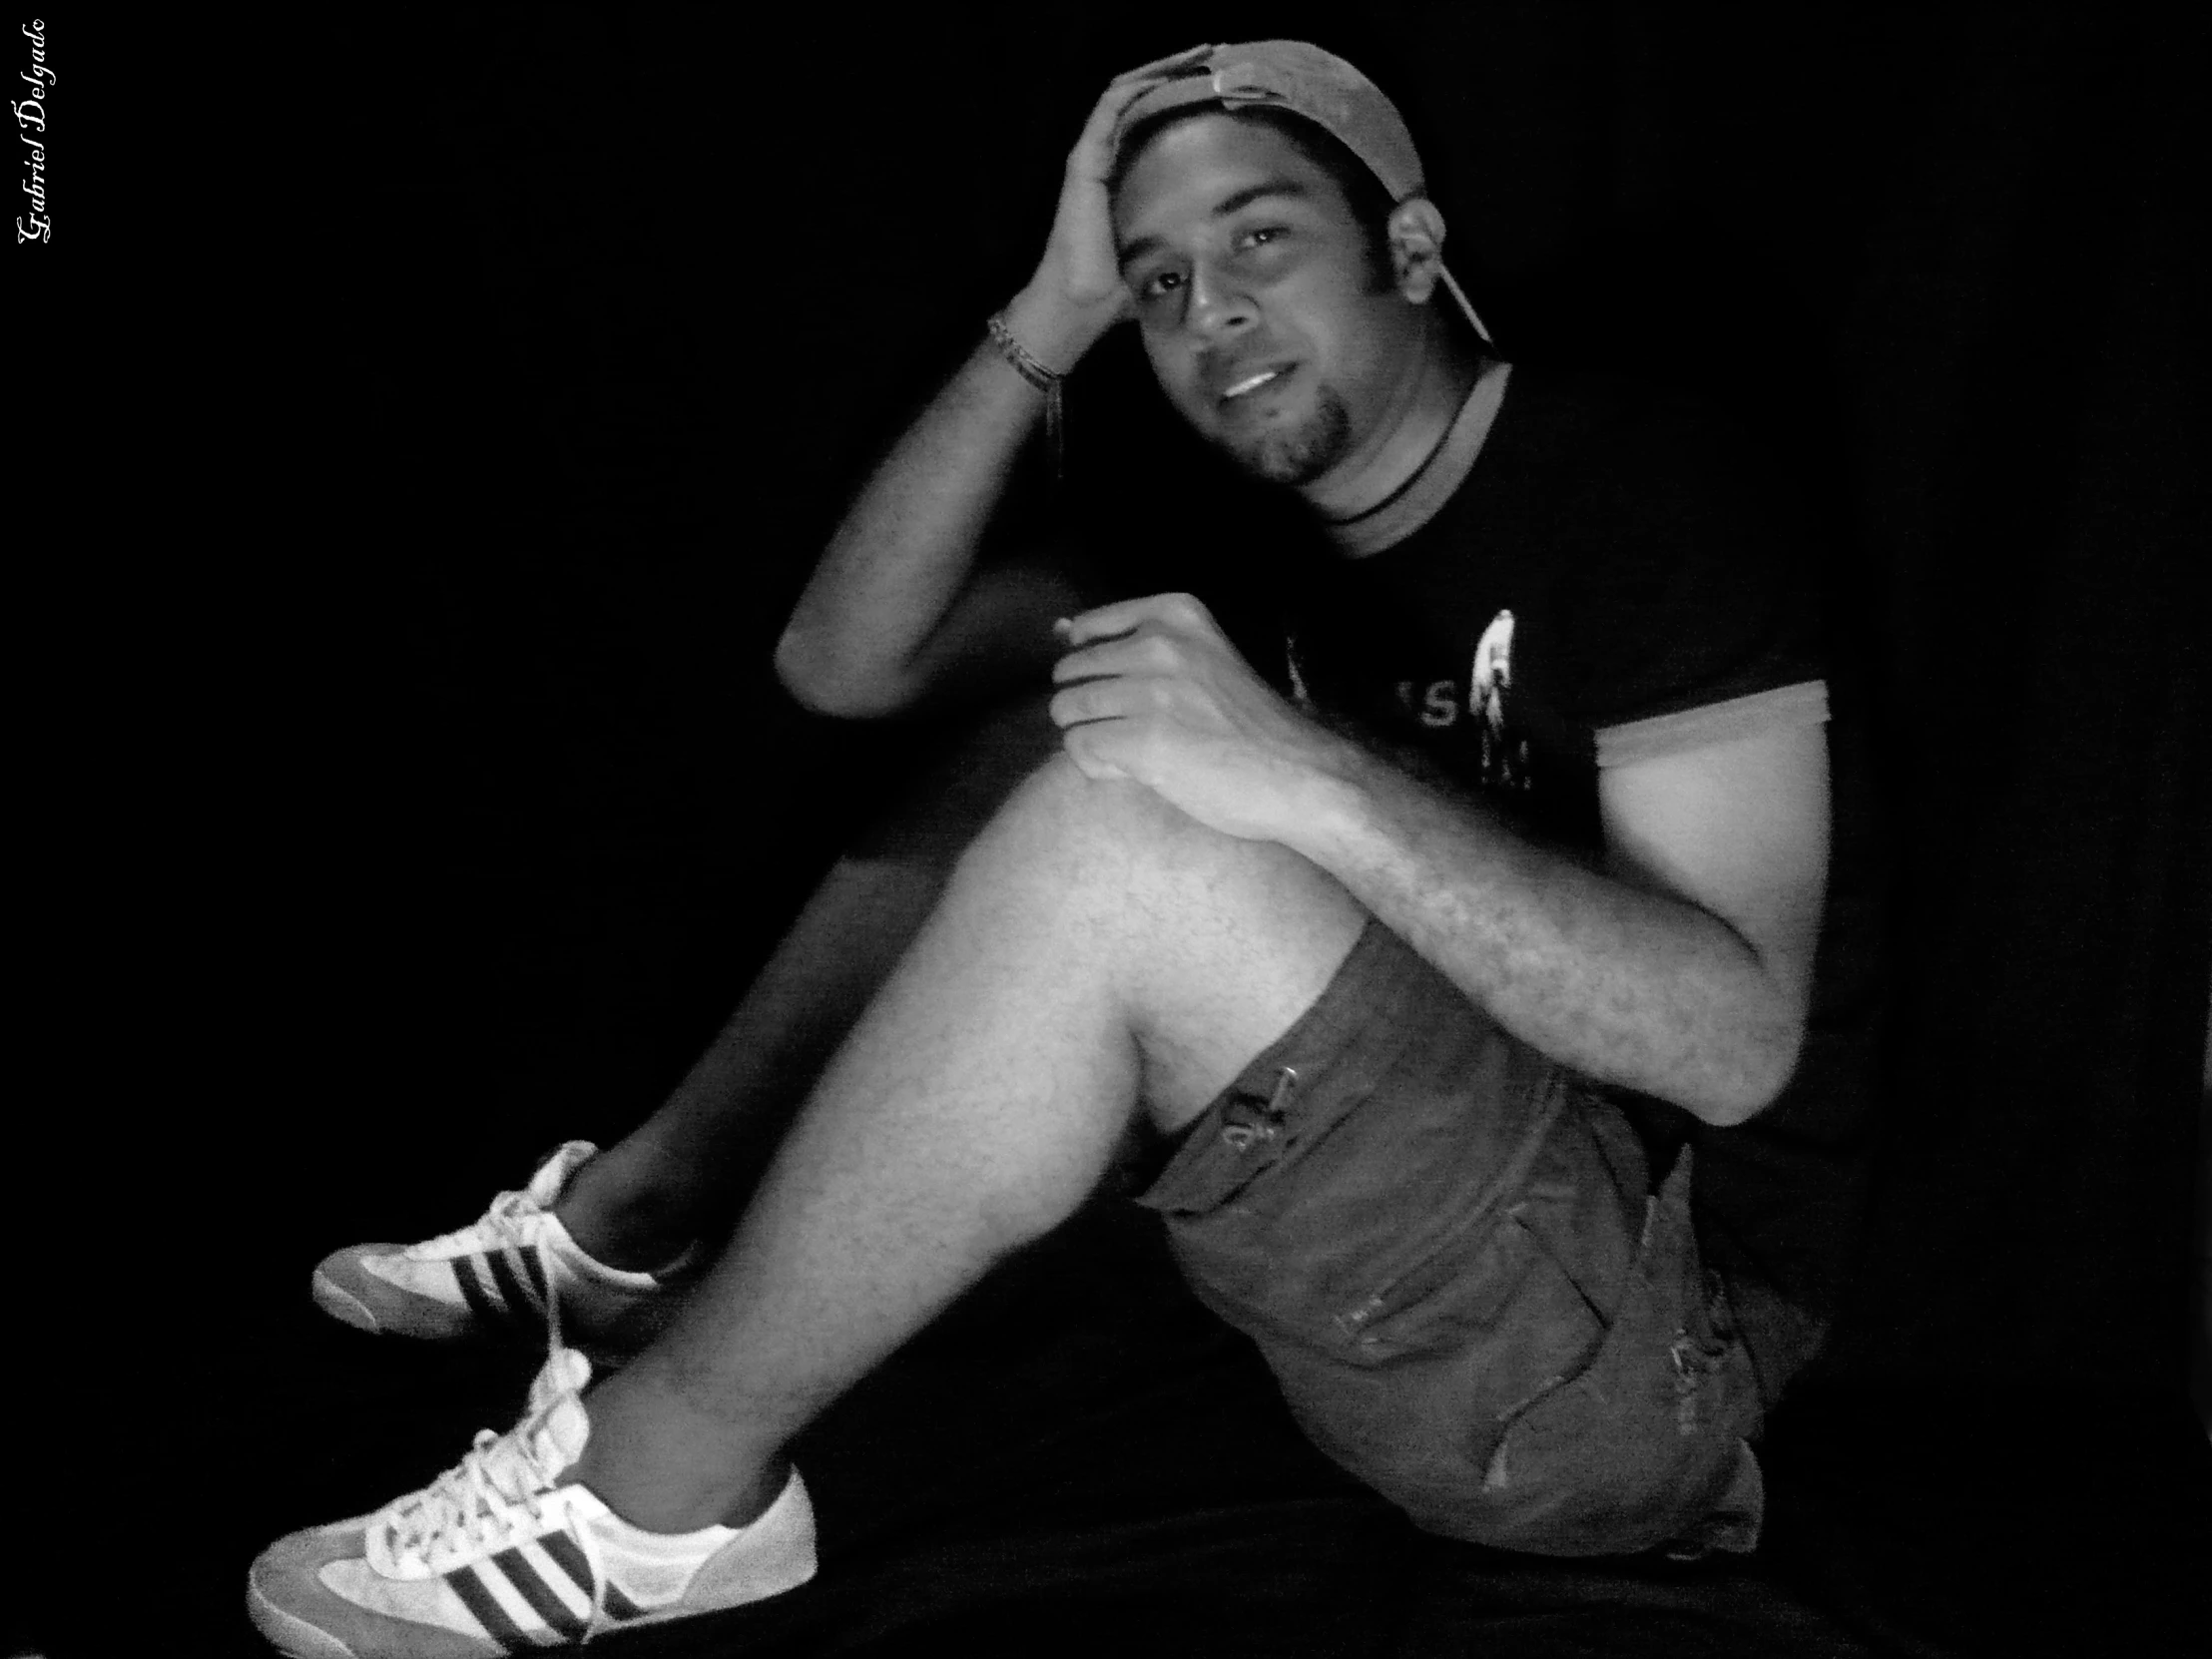 a black and white image of a man in shorts